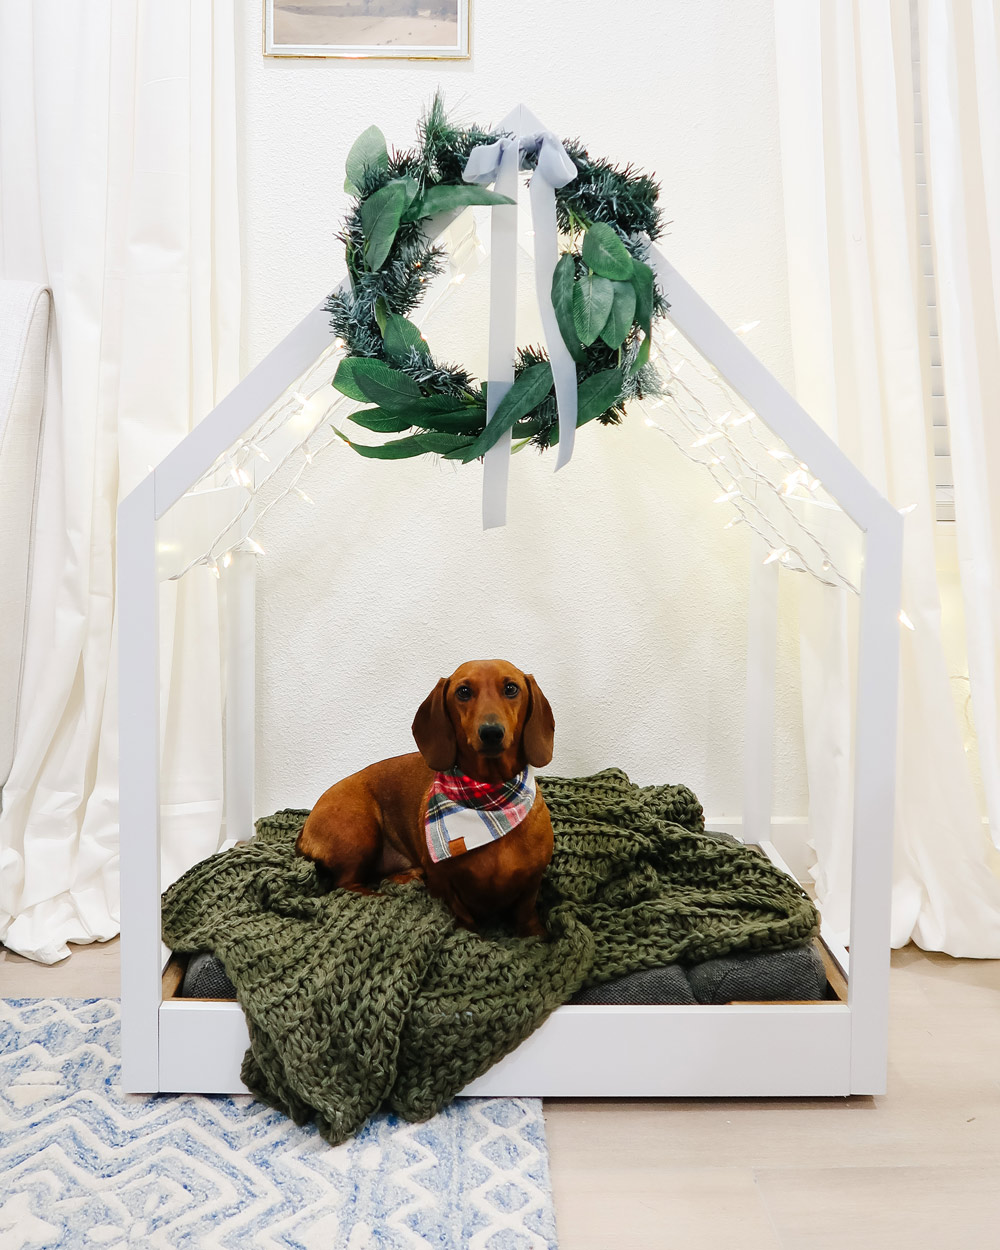 Dog laying in a DIY dog bed decorated with a wreath, lights, and blanket.